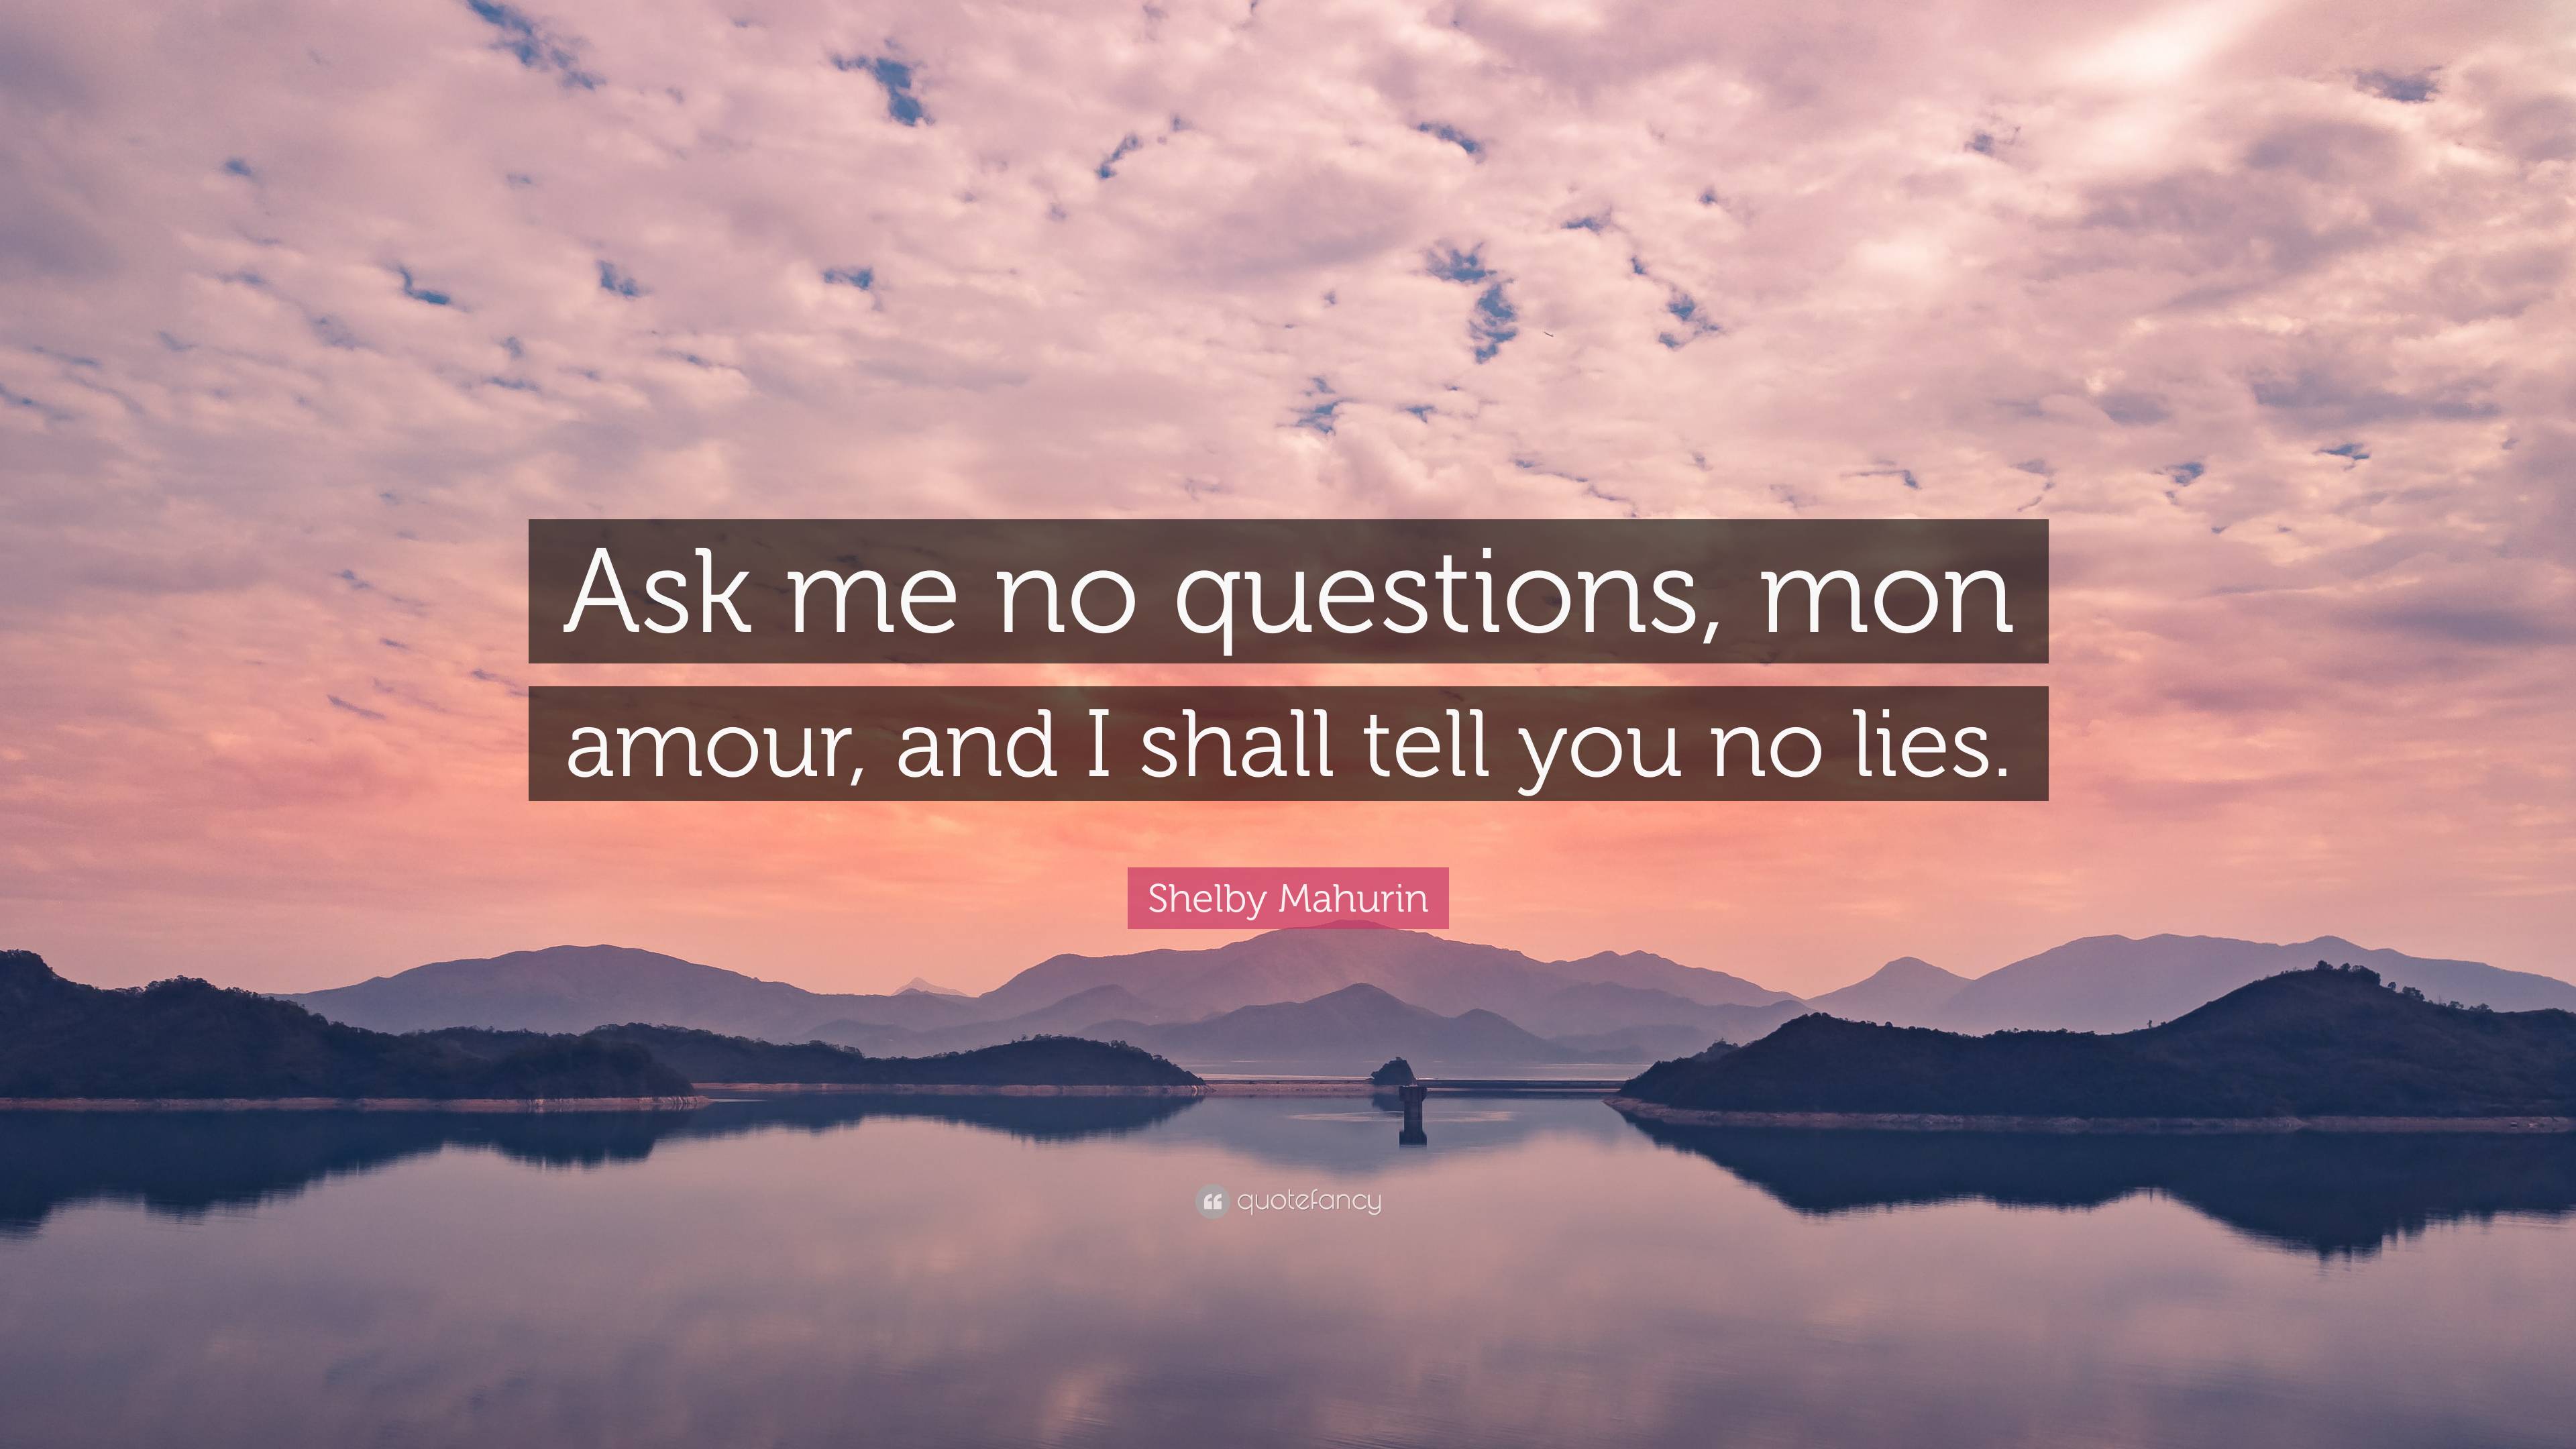 Shelby Mahurin Quote “ask Me No Questions Mon Amour And I Shall Tell You No Lies”